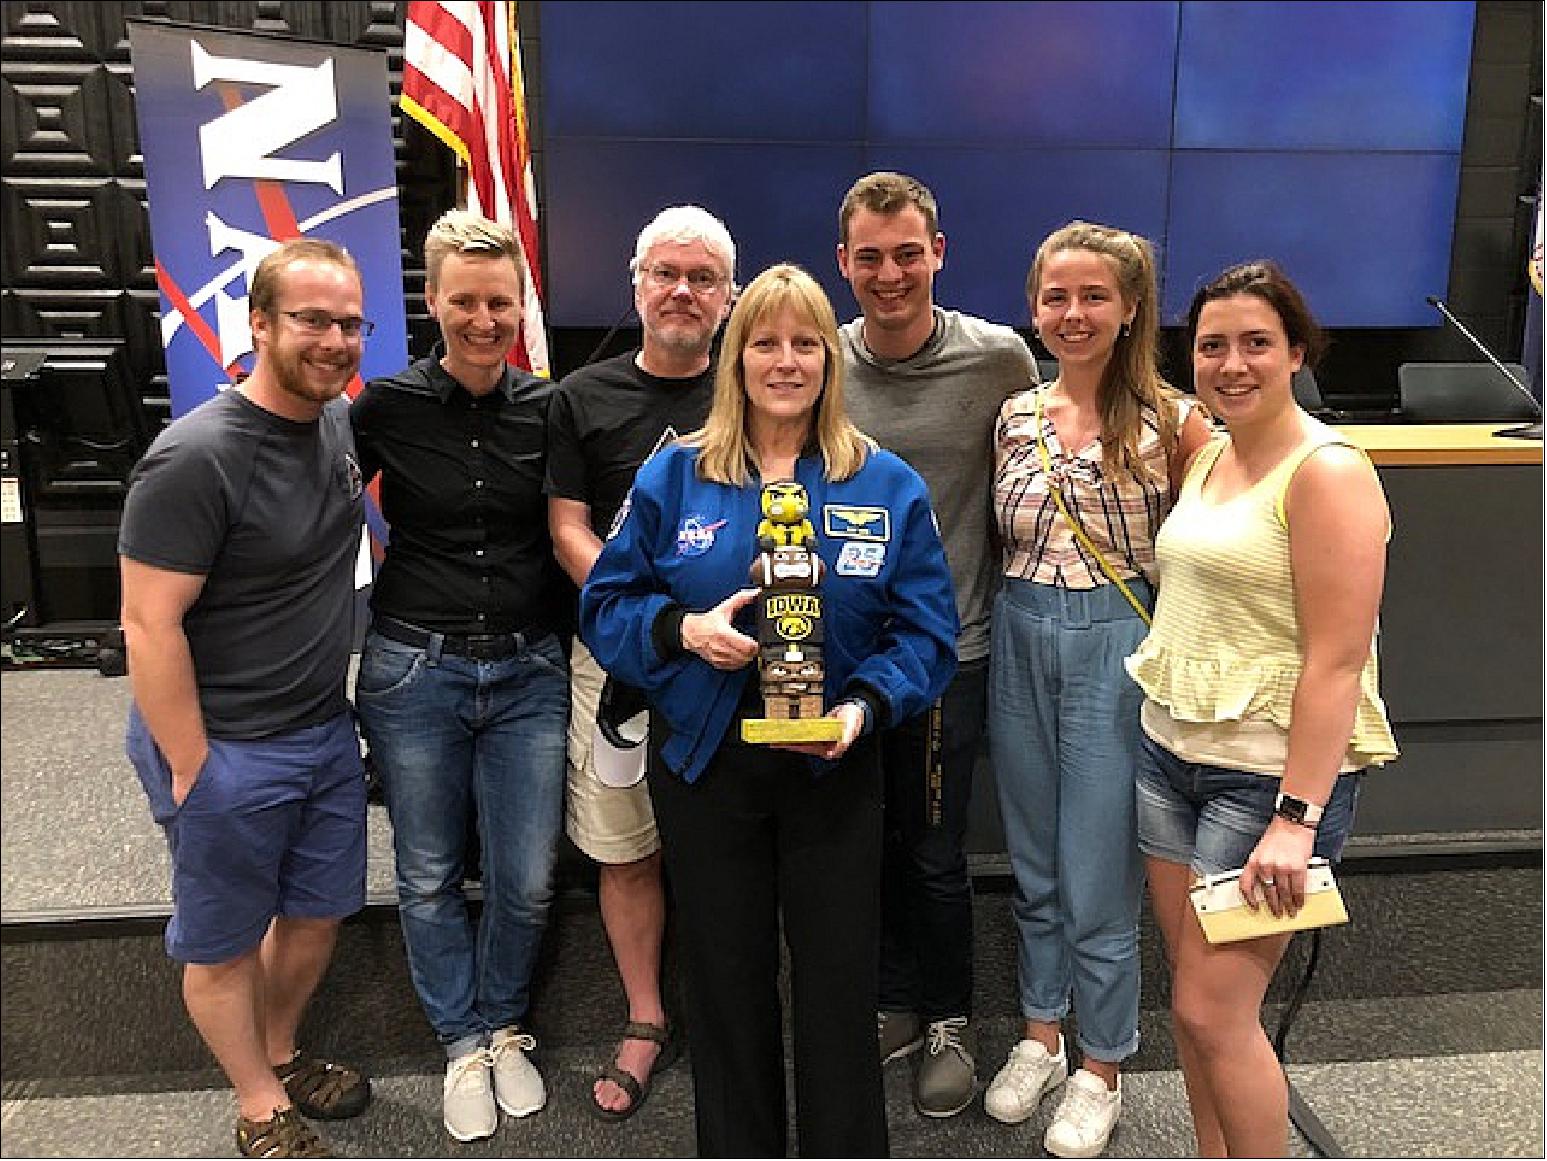 Figure 9: The University of Iowa HaloSat team attended the satellite’s launch at NASA’s Wallops Flight Facility. From left to right: Daniel LaRocca, Anna Zajczjk, Philip Kaaret, William Fuelberth, Hannah Gulick and Emily Silich. Kay Hire (center) holds the University of Iowa’s tiki totem statue (image credit: Alexis Durow, Ref. 27)